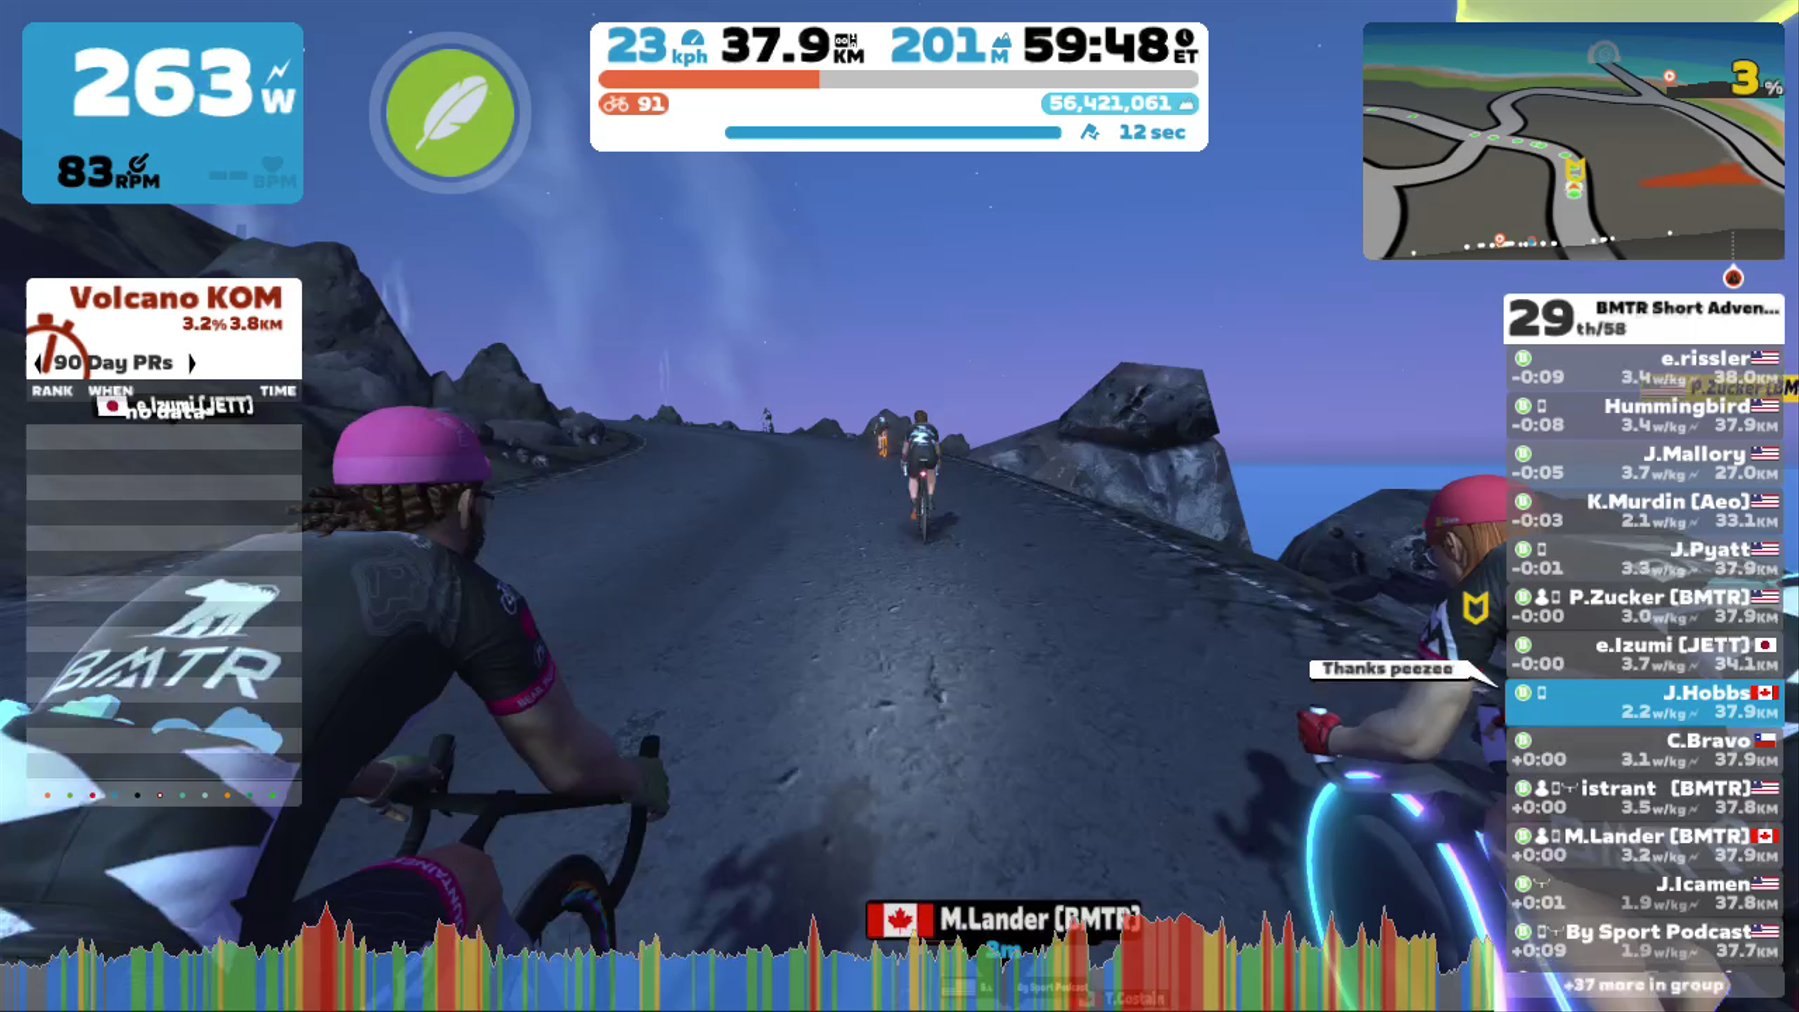 Zwift - Group Ride: BMTR Short Adventure (B) on Volcano Climb After Party in Watopia